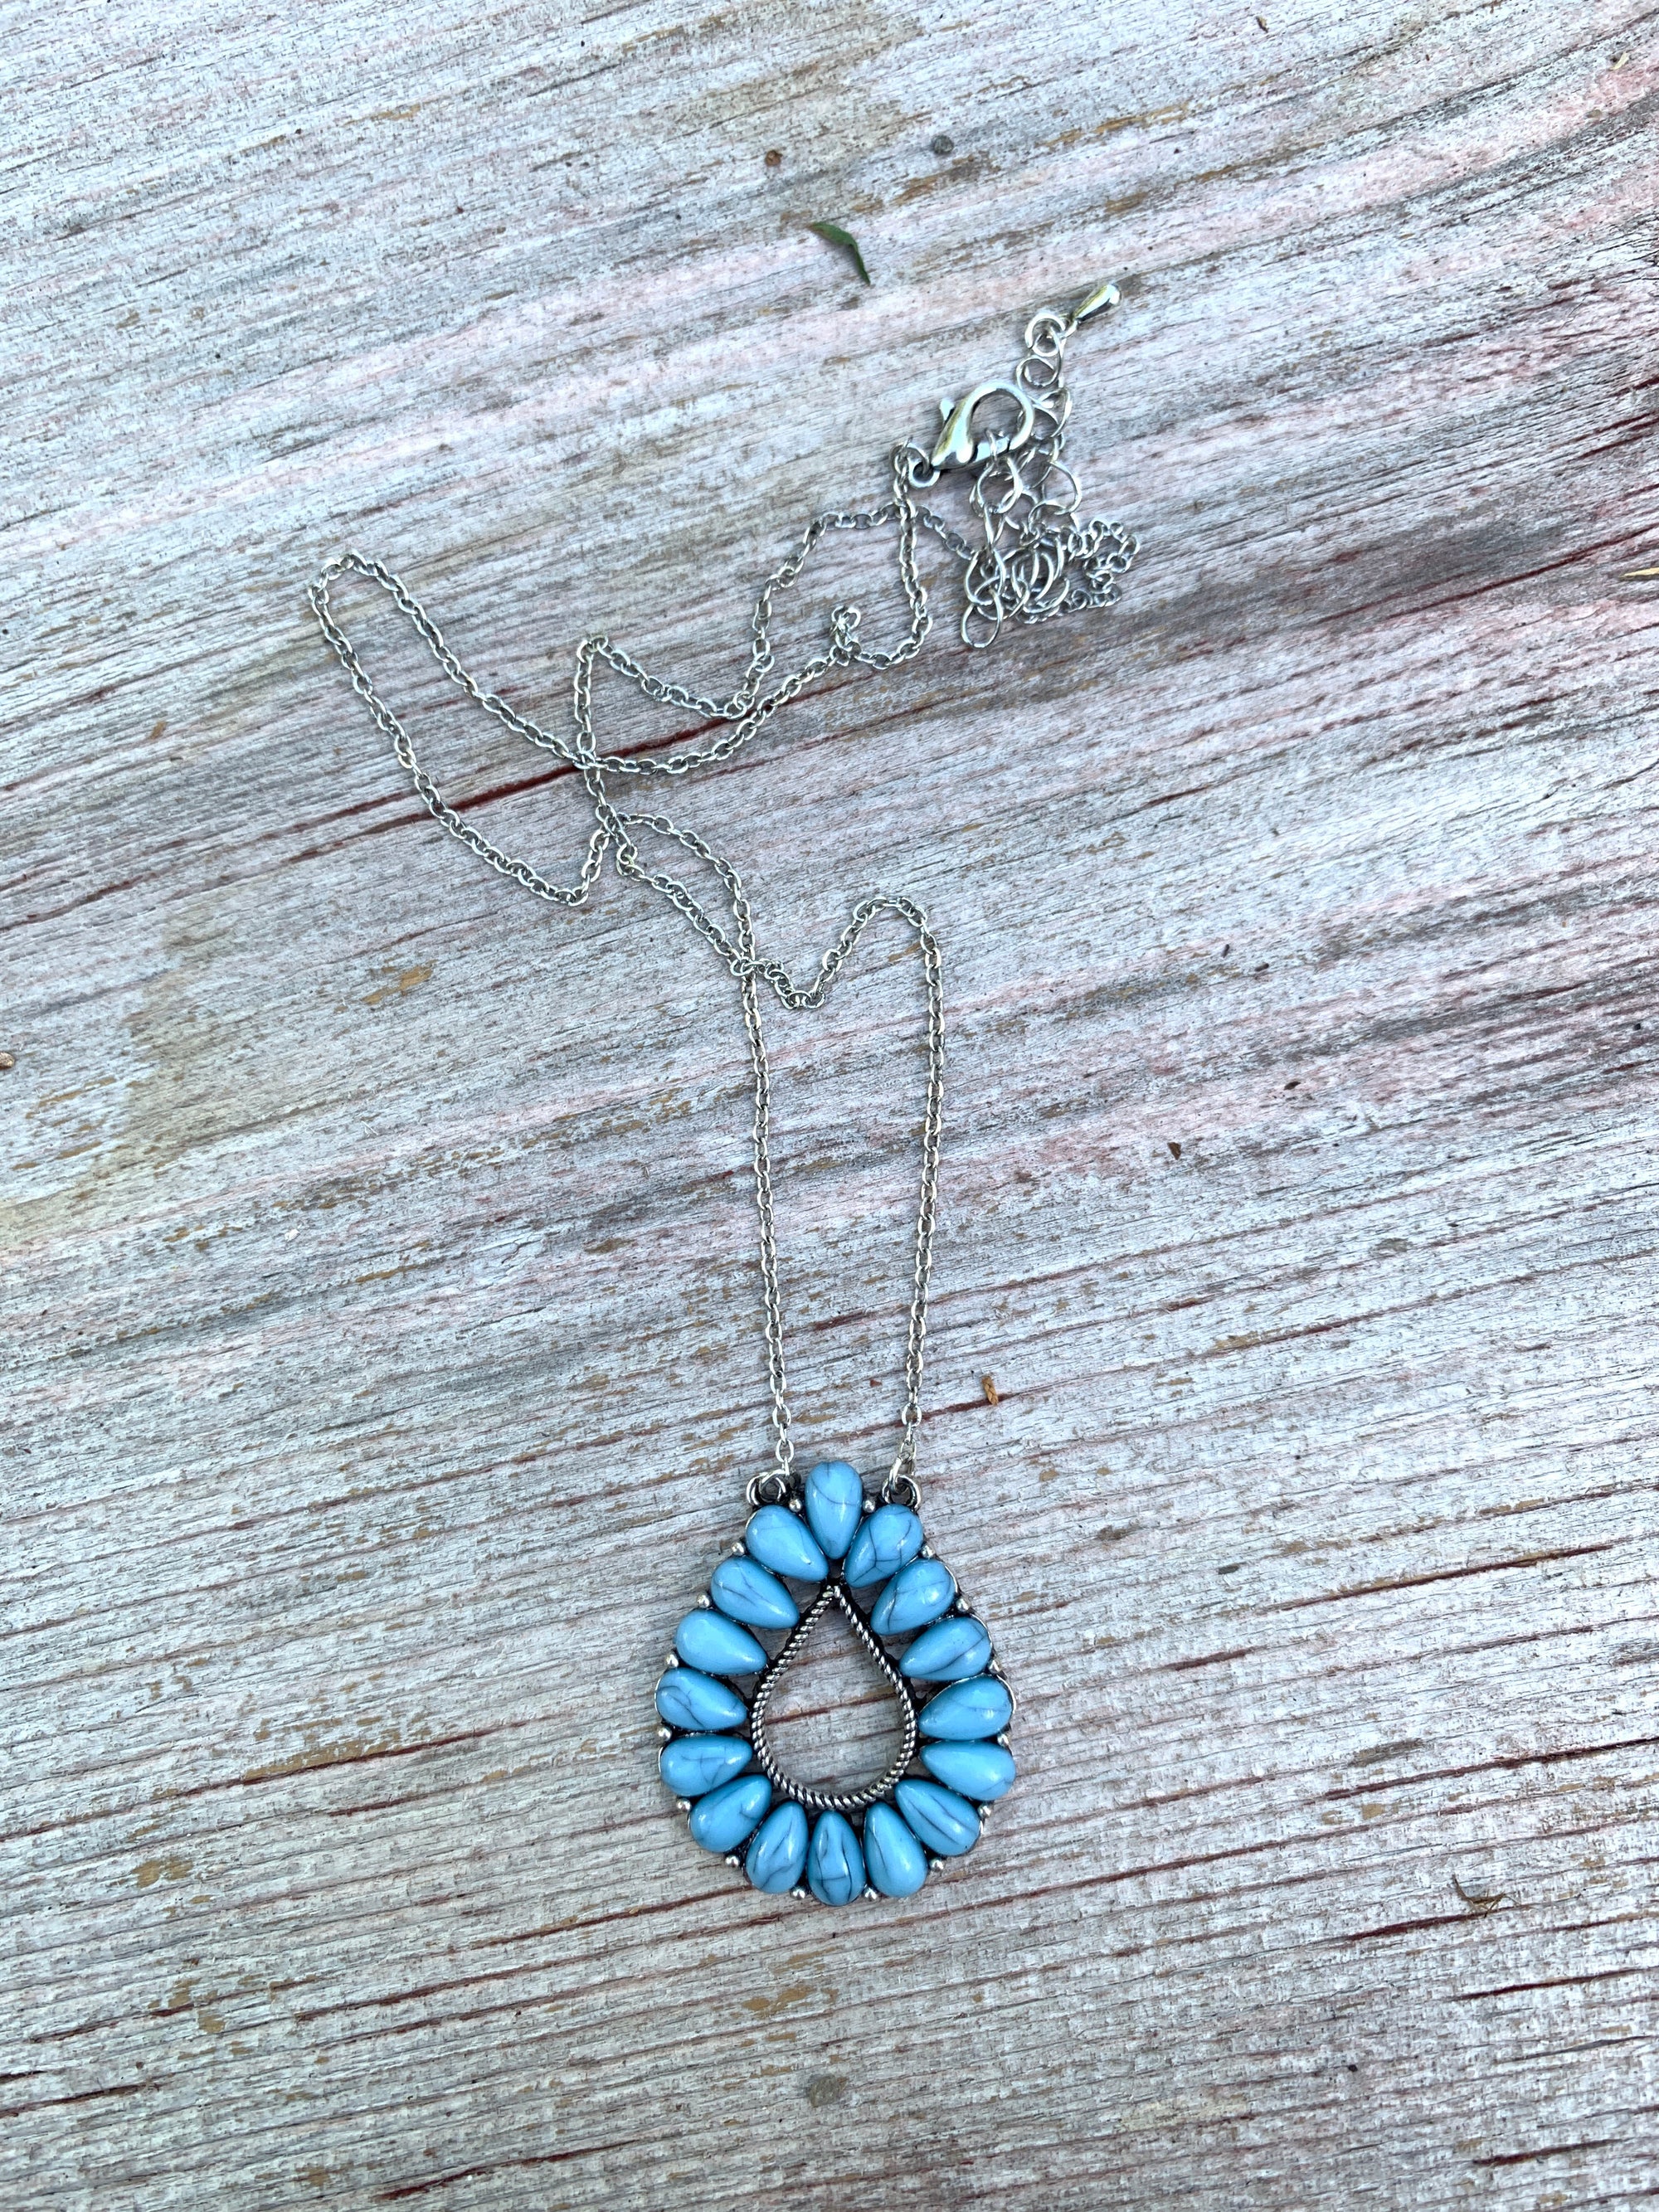 Turquoise Tear Drop Chain Necklace